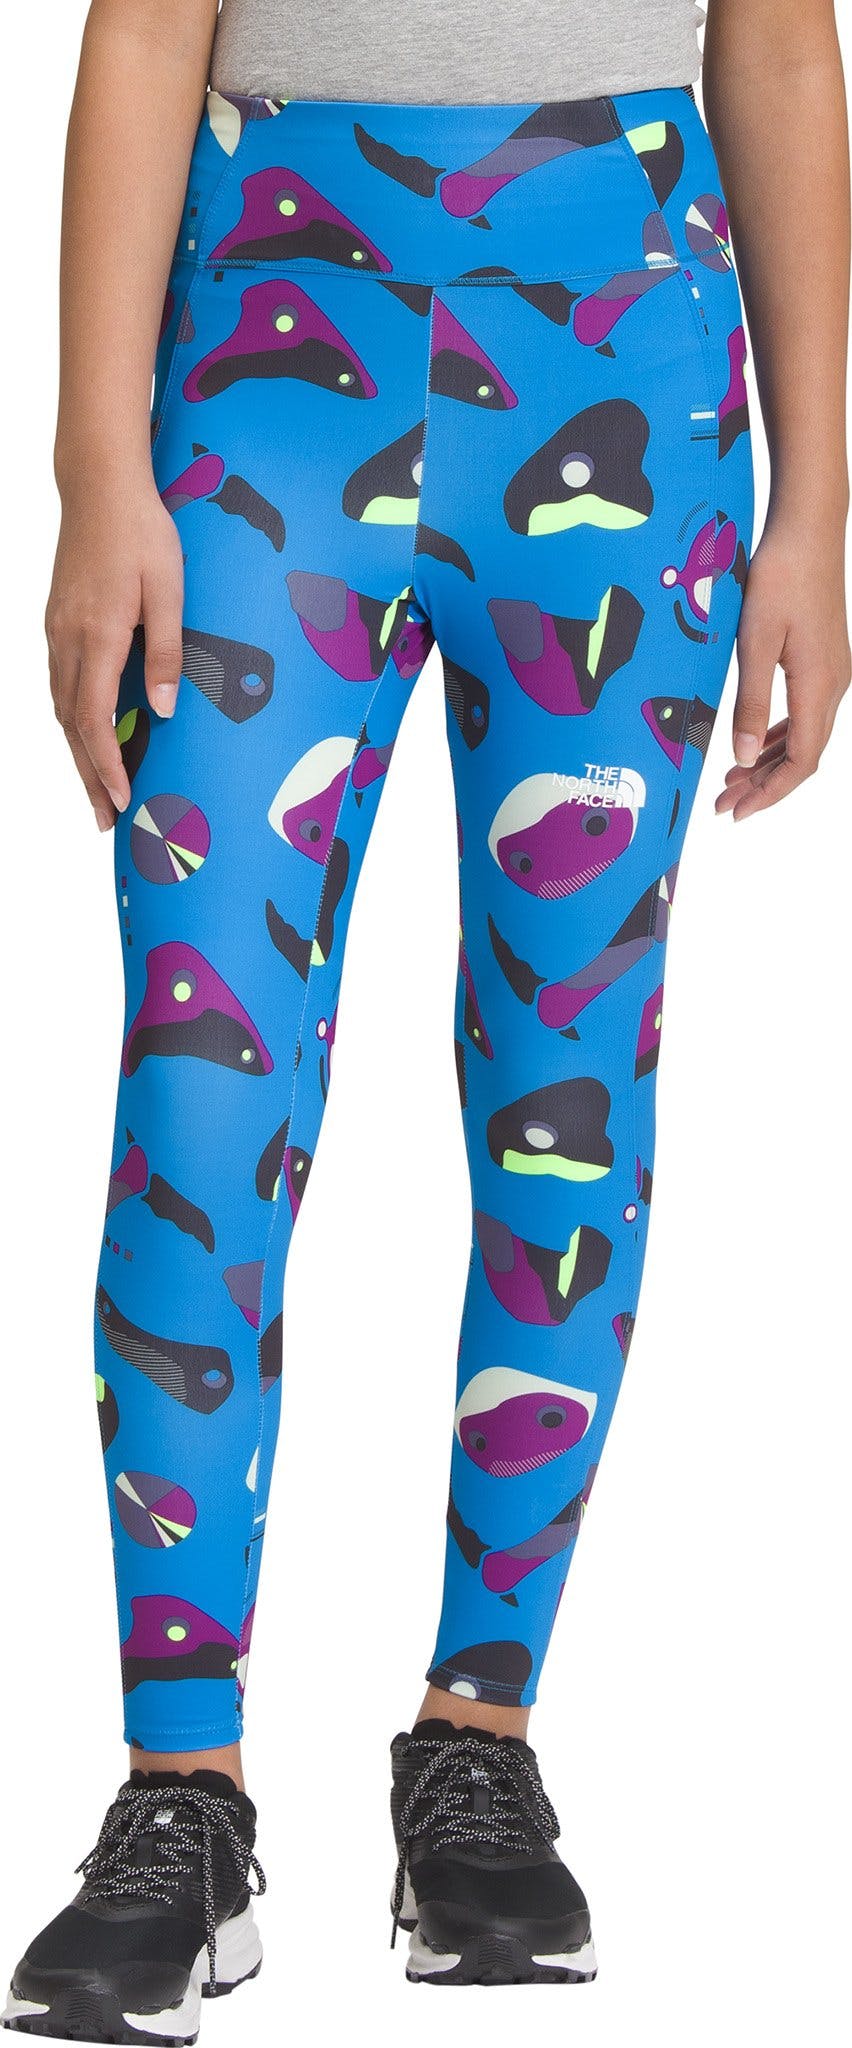 Product image for Never Stop Tights - Girls